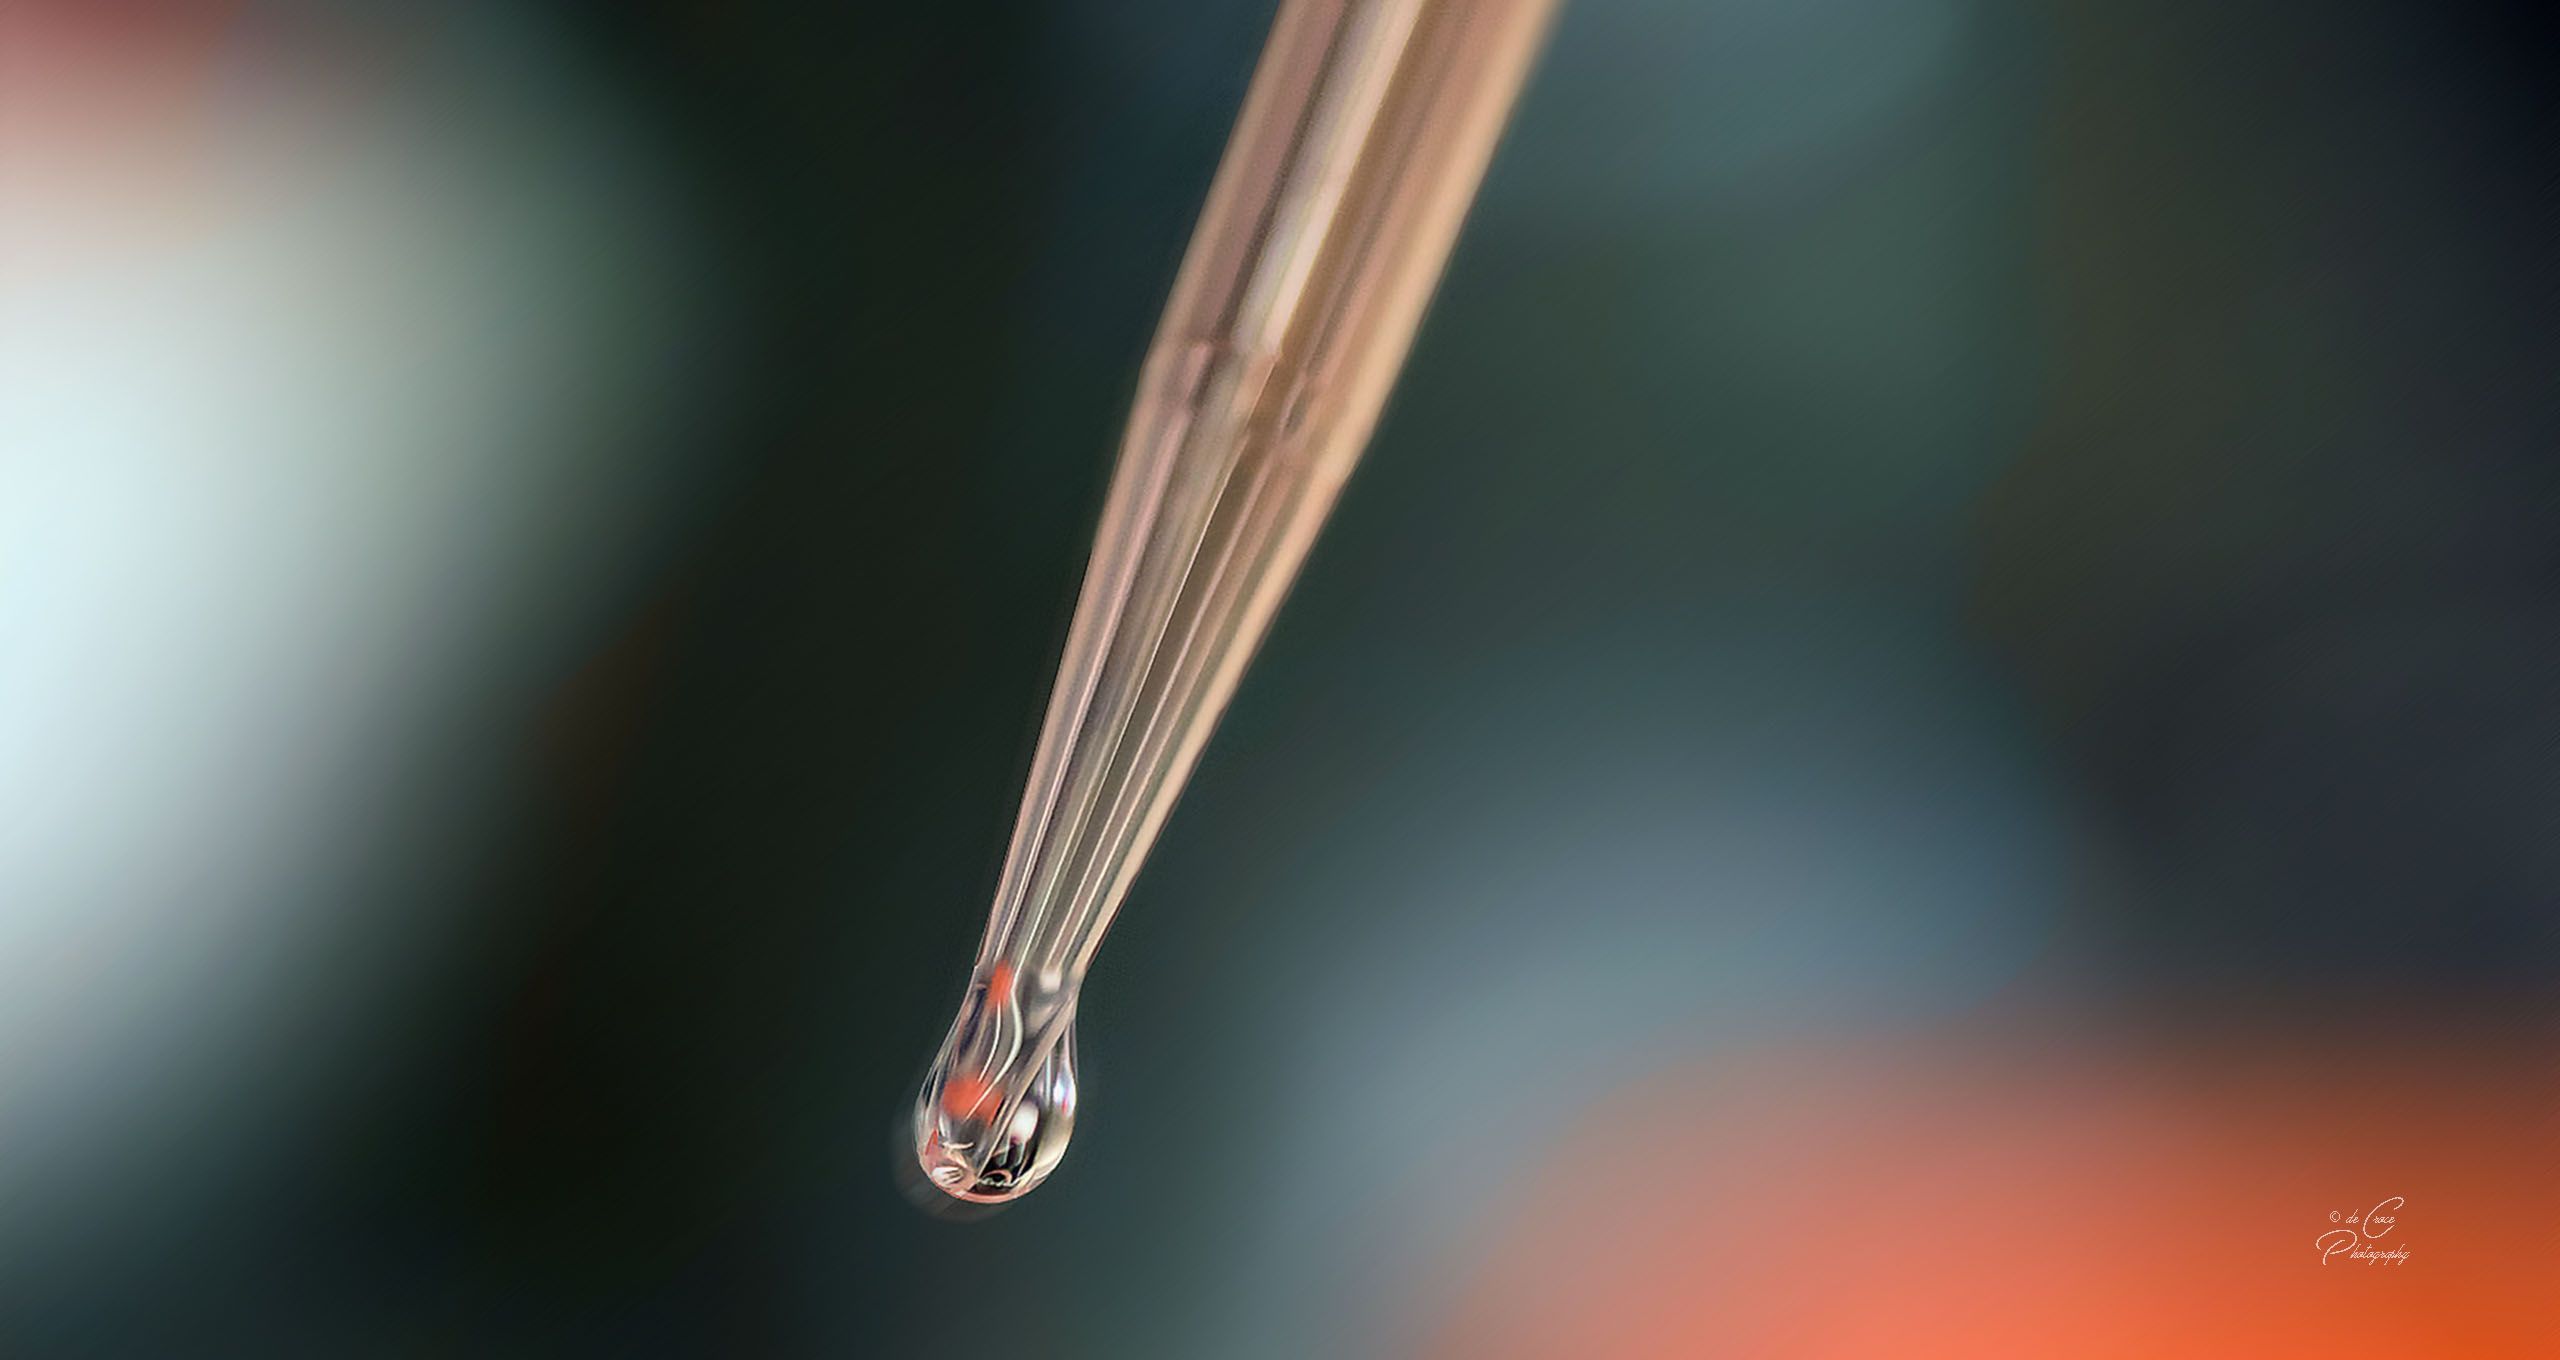 Test Tube Drop Medical Photography.